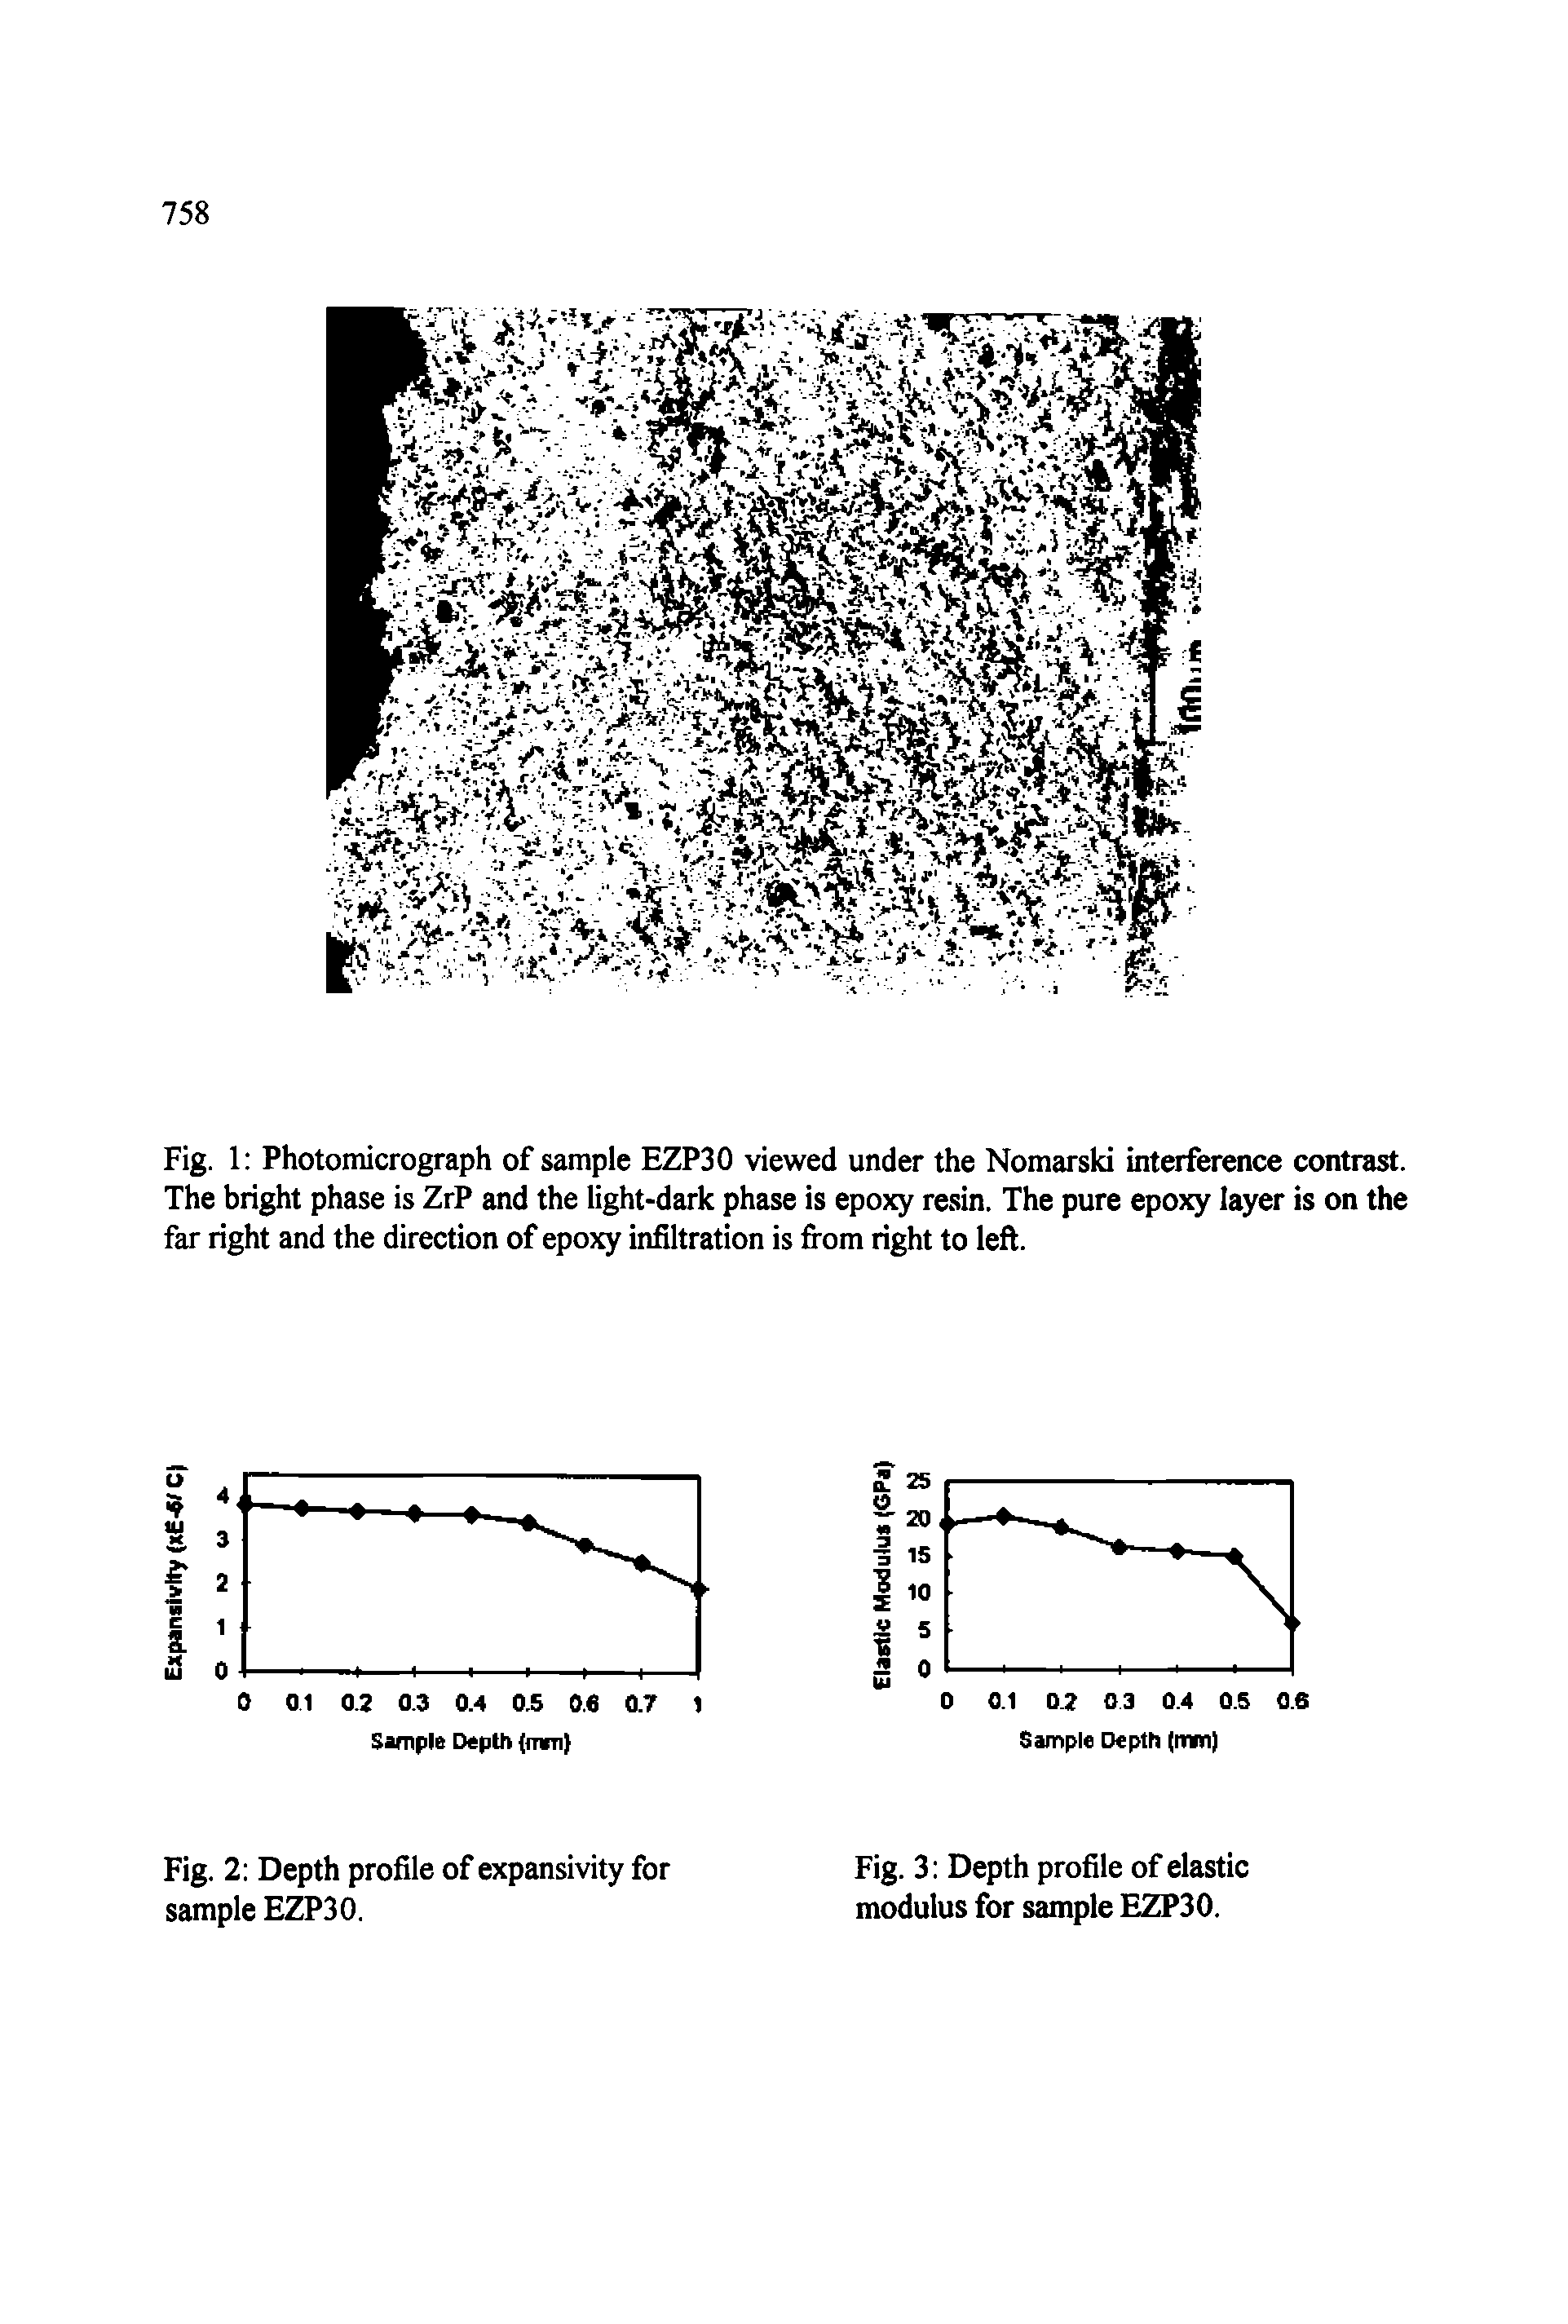 Fig. 1 Photomicrograph of sample EZP30 viewed under the Nomarski interference contrast. The bright phase is ZrP and the light-dark phase is epoxy resin. The pure epoxy layer is on the far right and the direction of epoxy infiltration is from right to left.